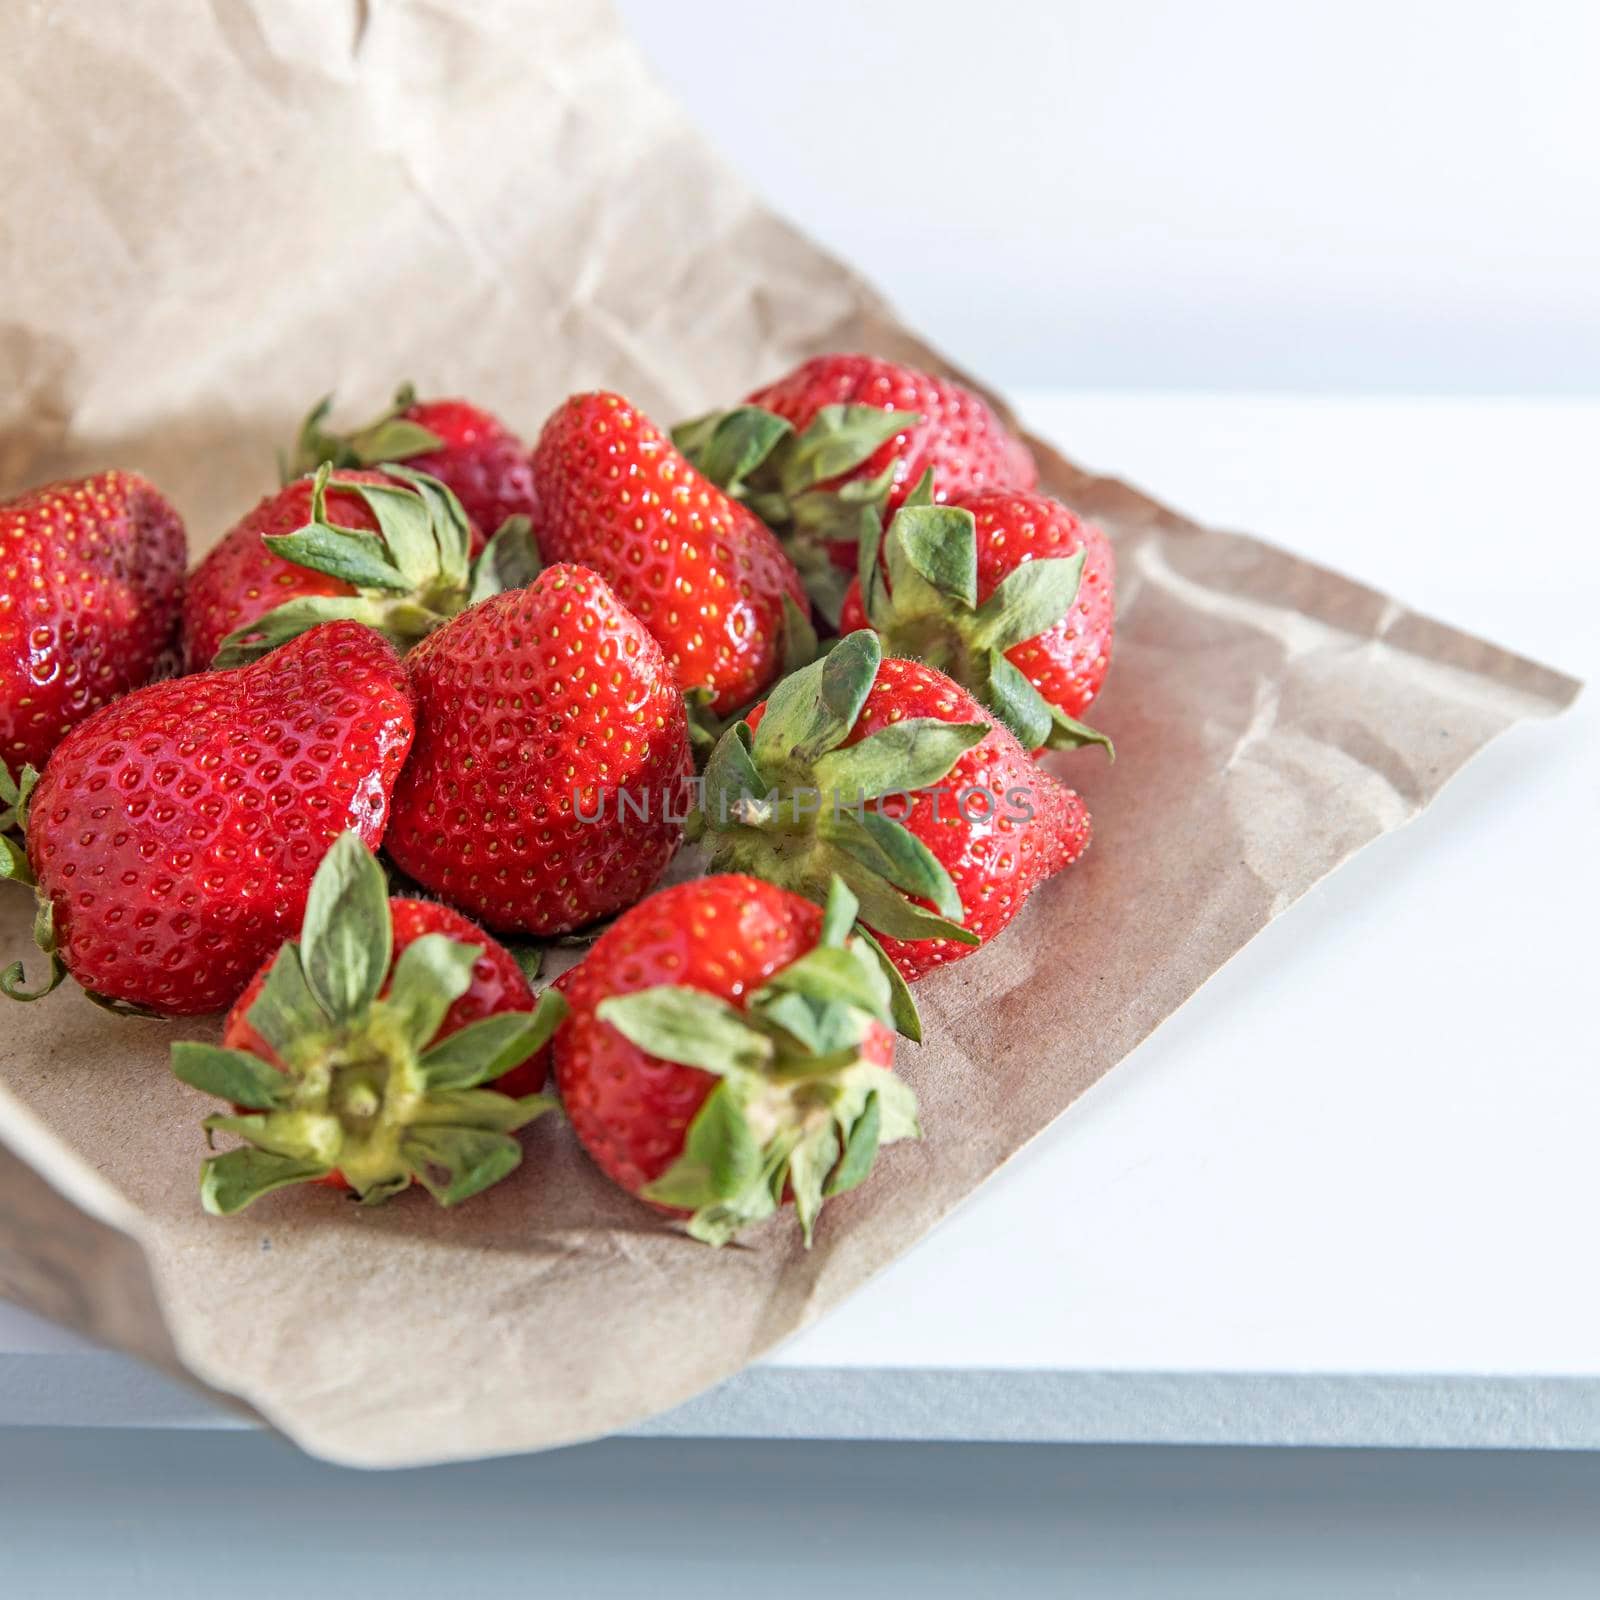 White metal basket with wooden handle with fresh strawberries on crumpled craft paper on white table. Breakfast